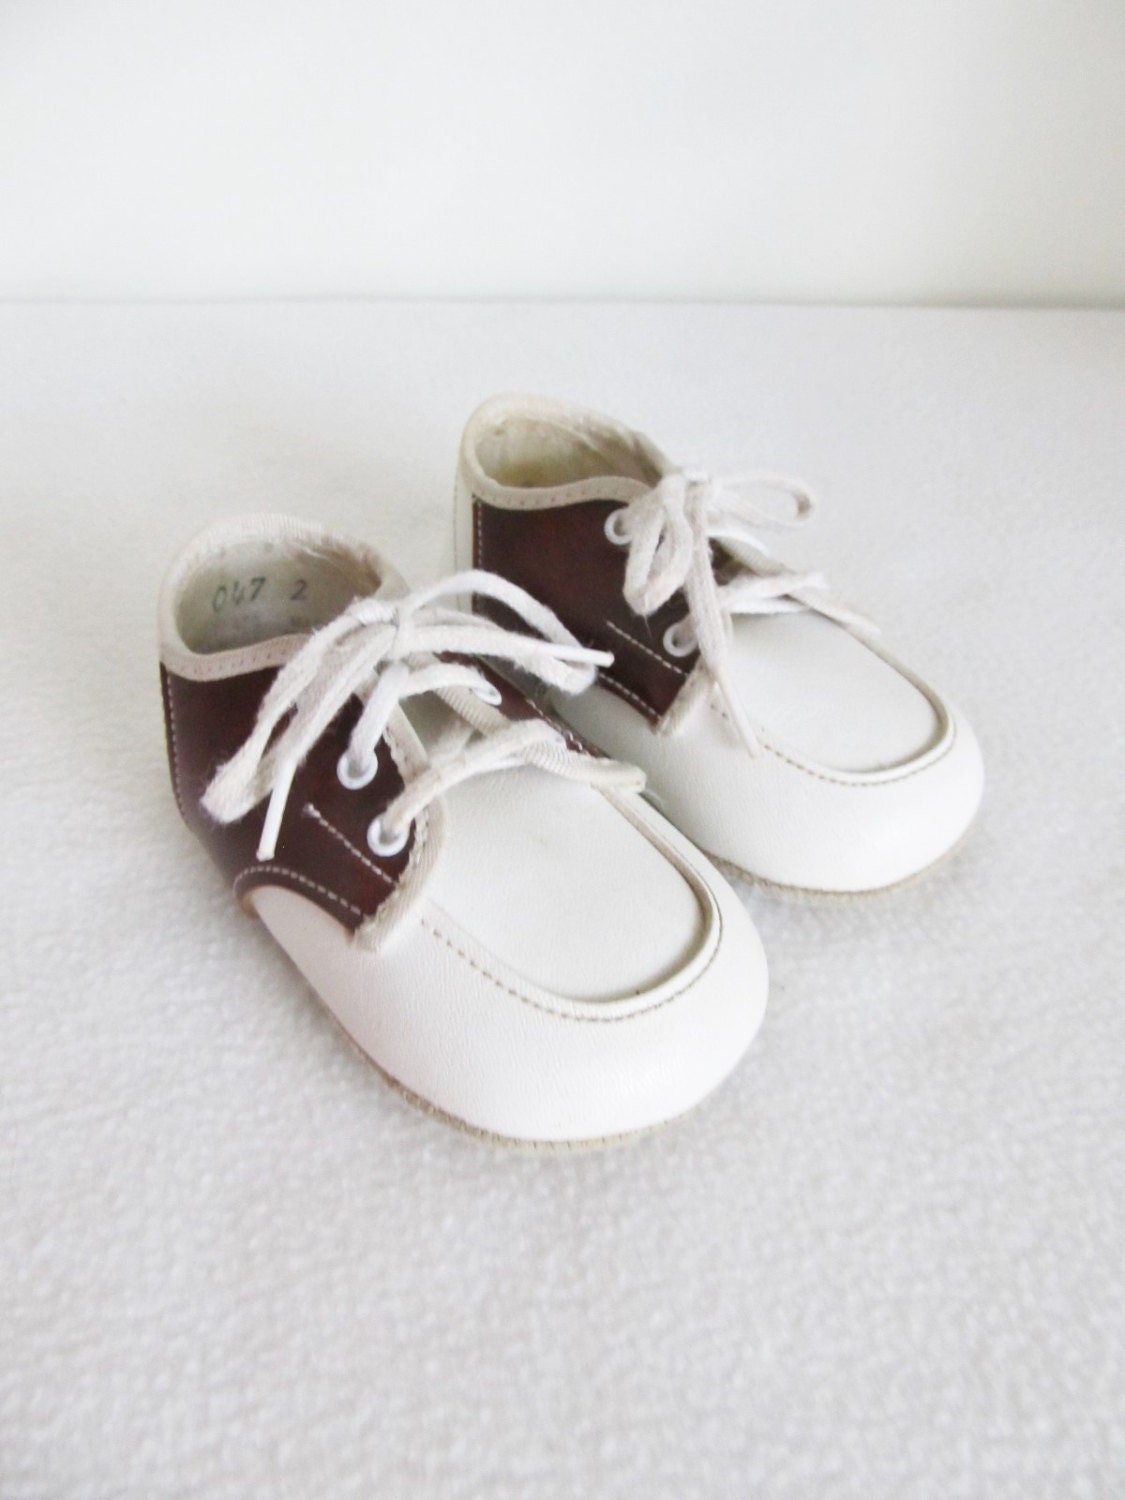 Vintage Baby Boys Shoes / Retro Brown and White Saddle Shoes